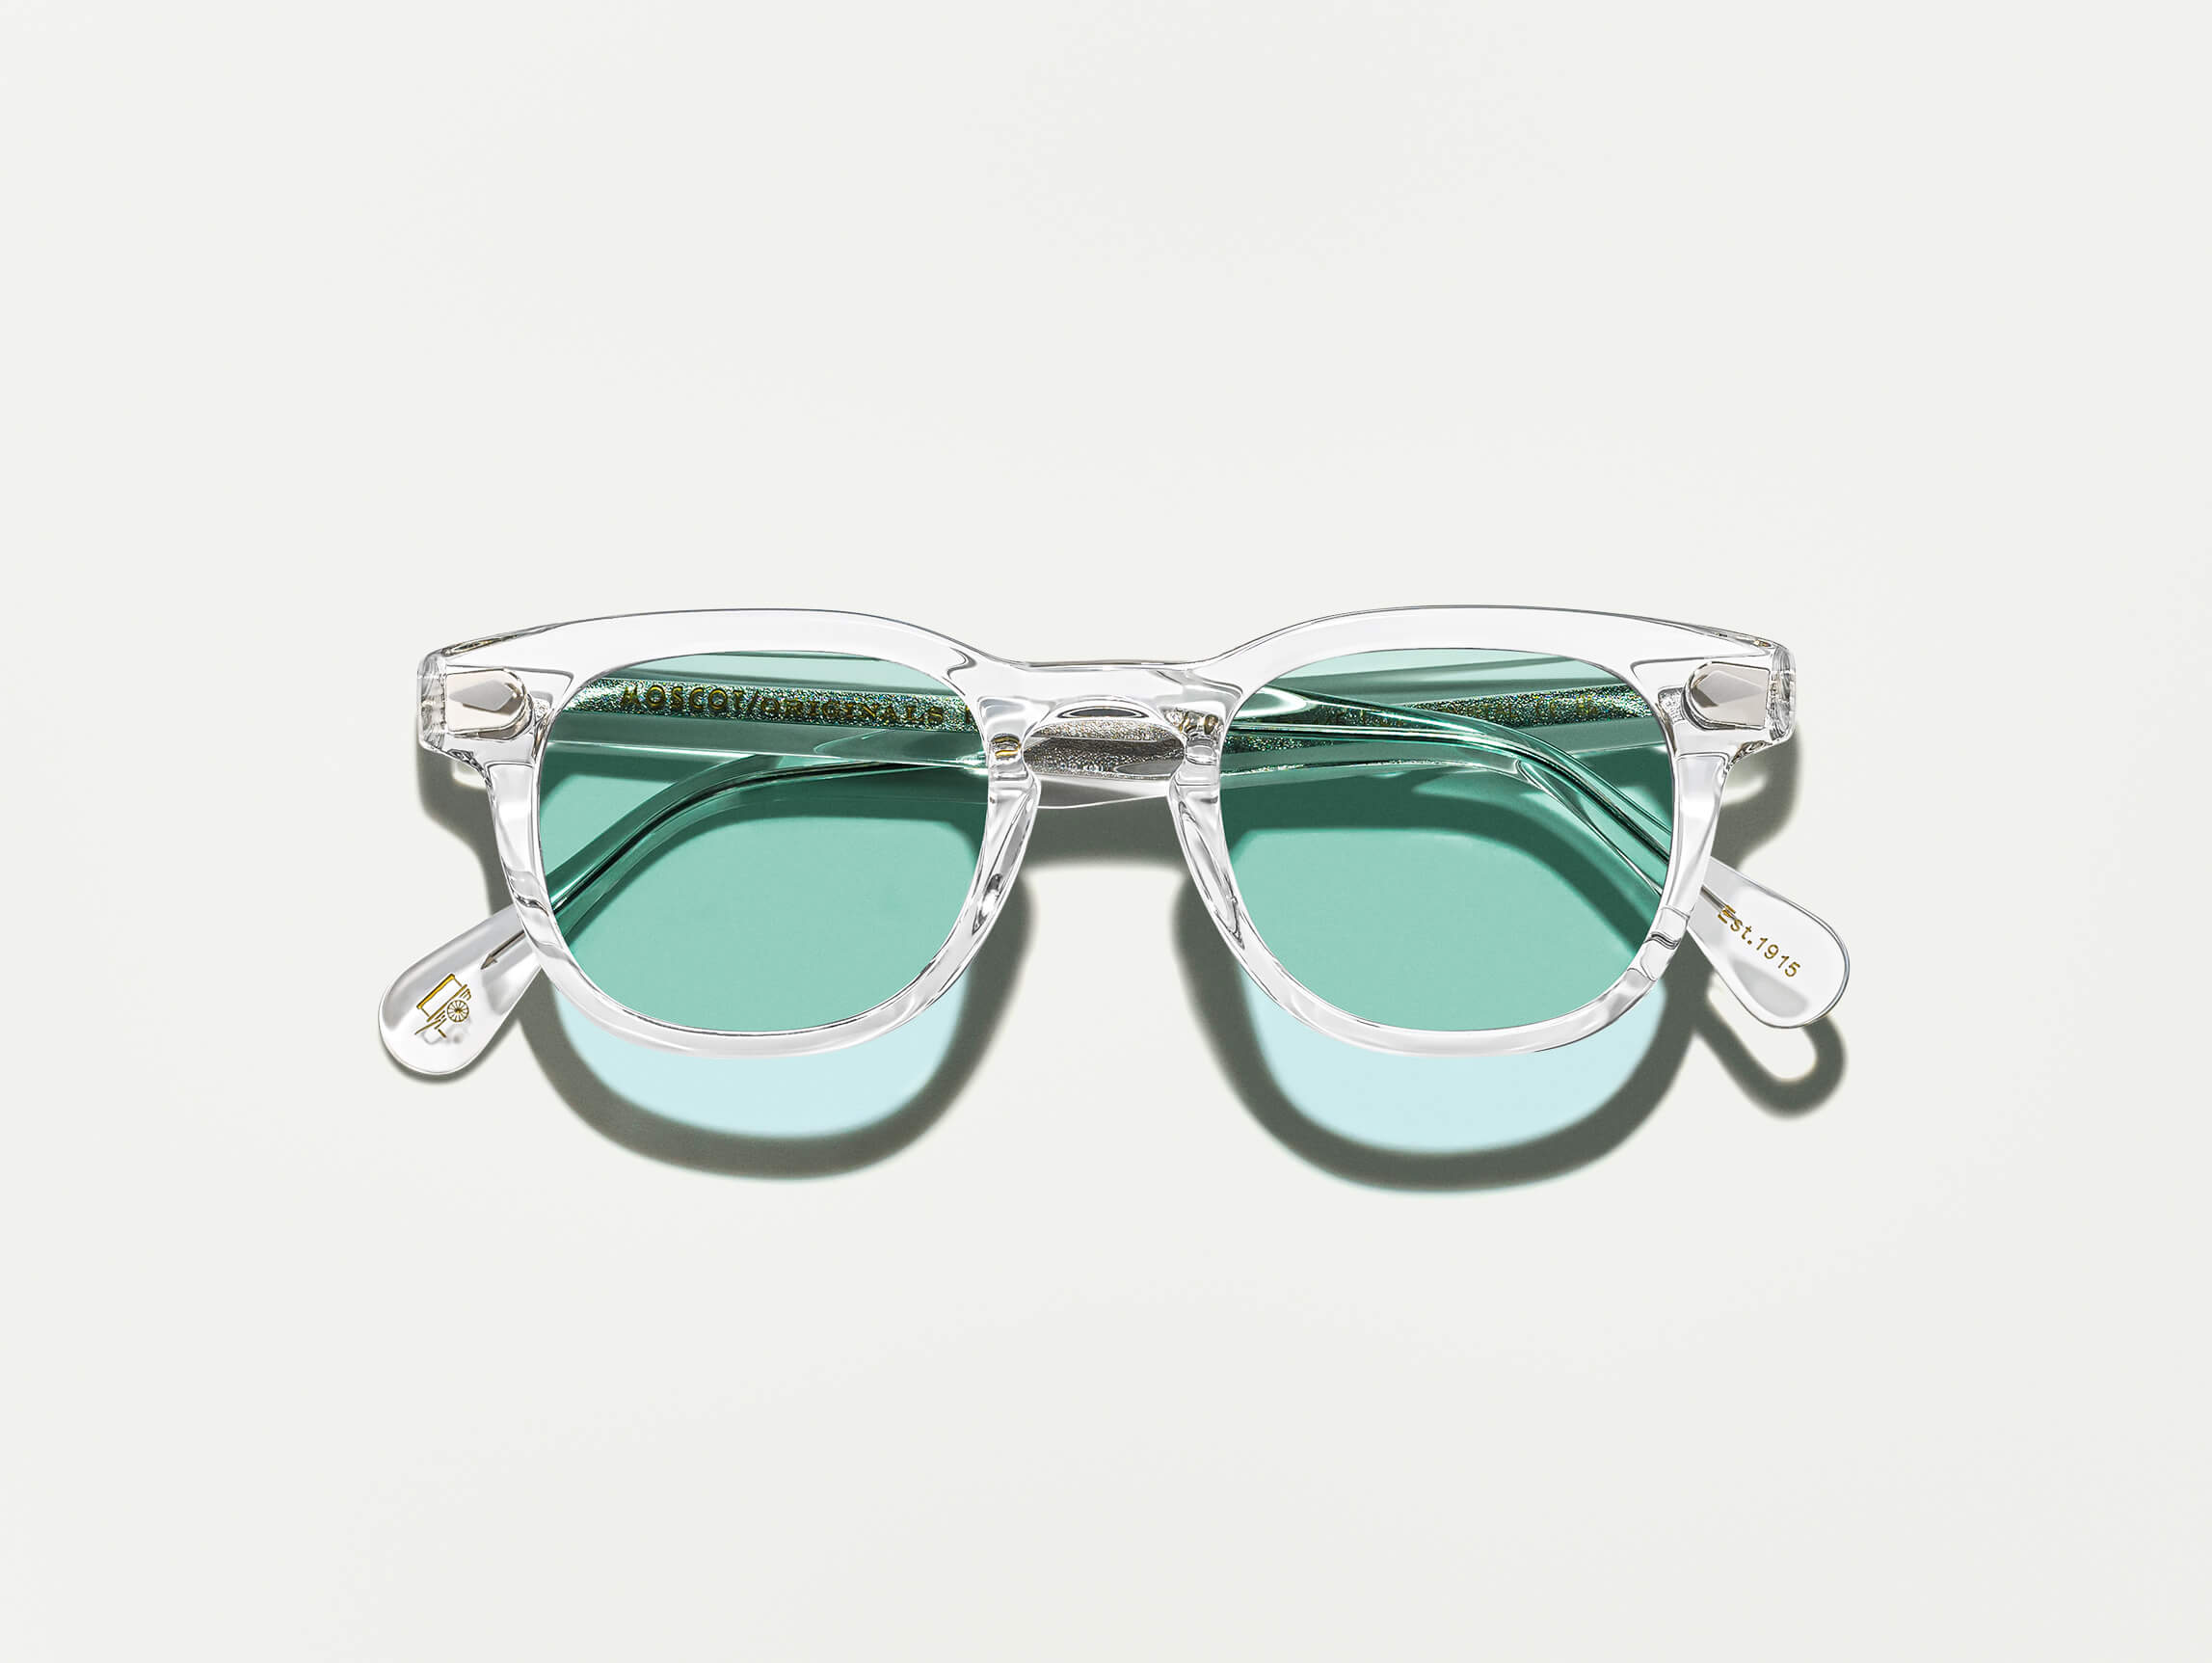 The GELT Crystal with Turquoise Tinted Lenses